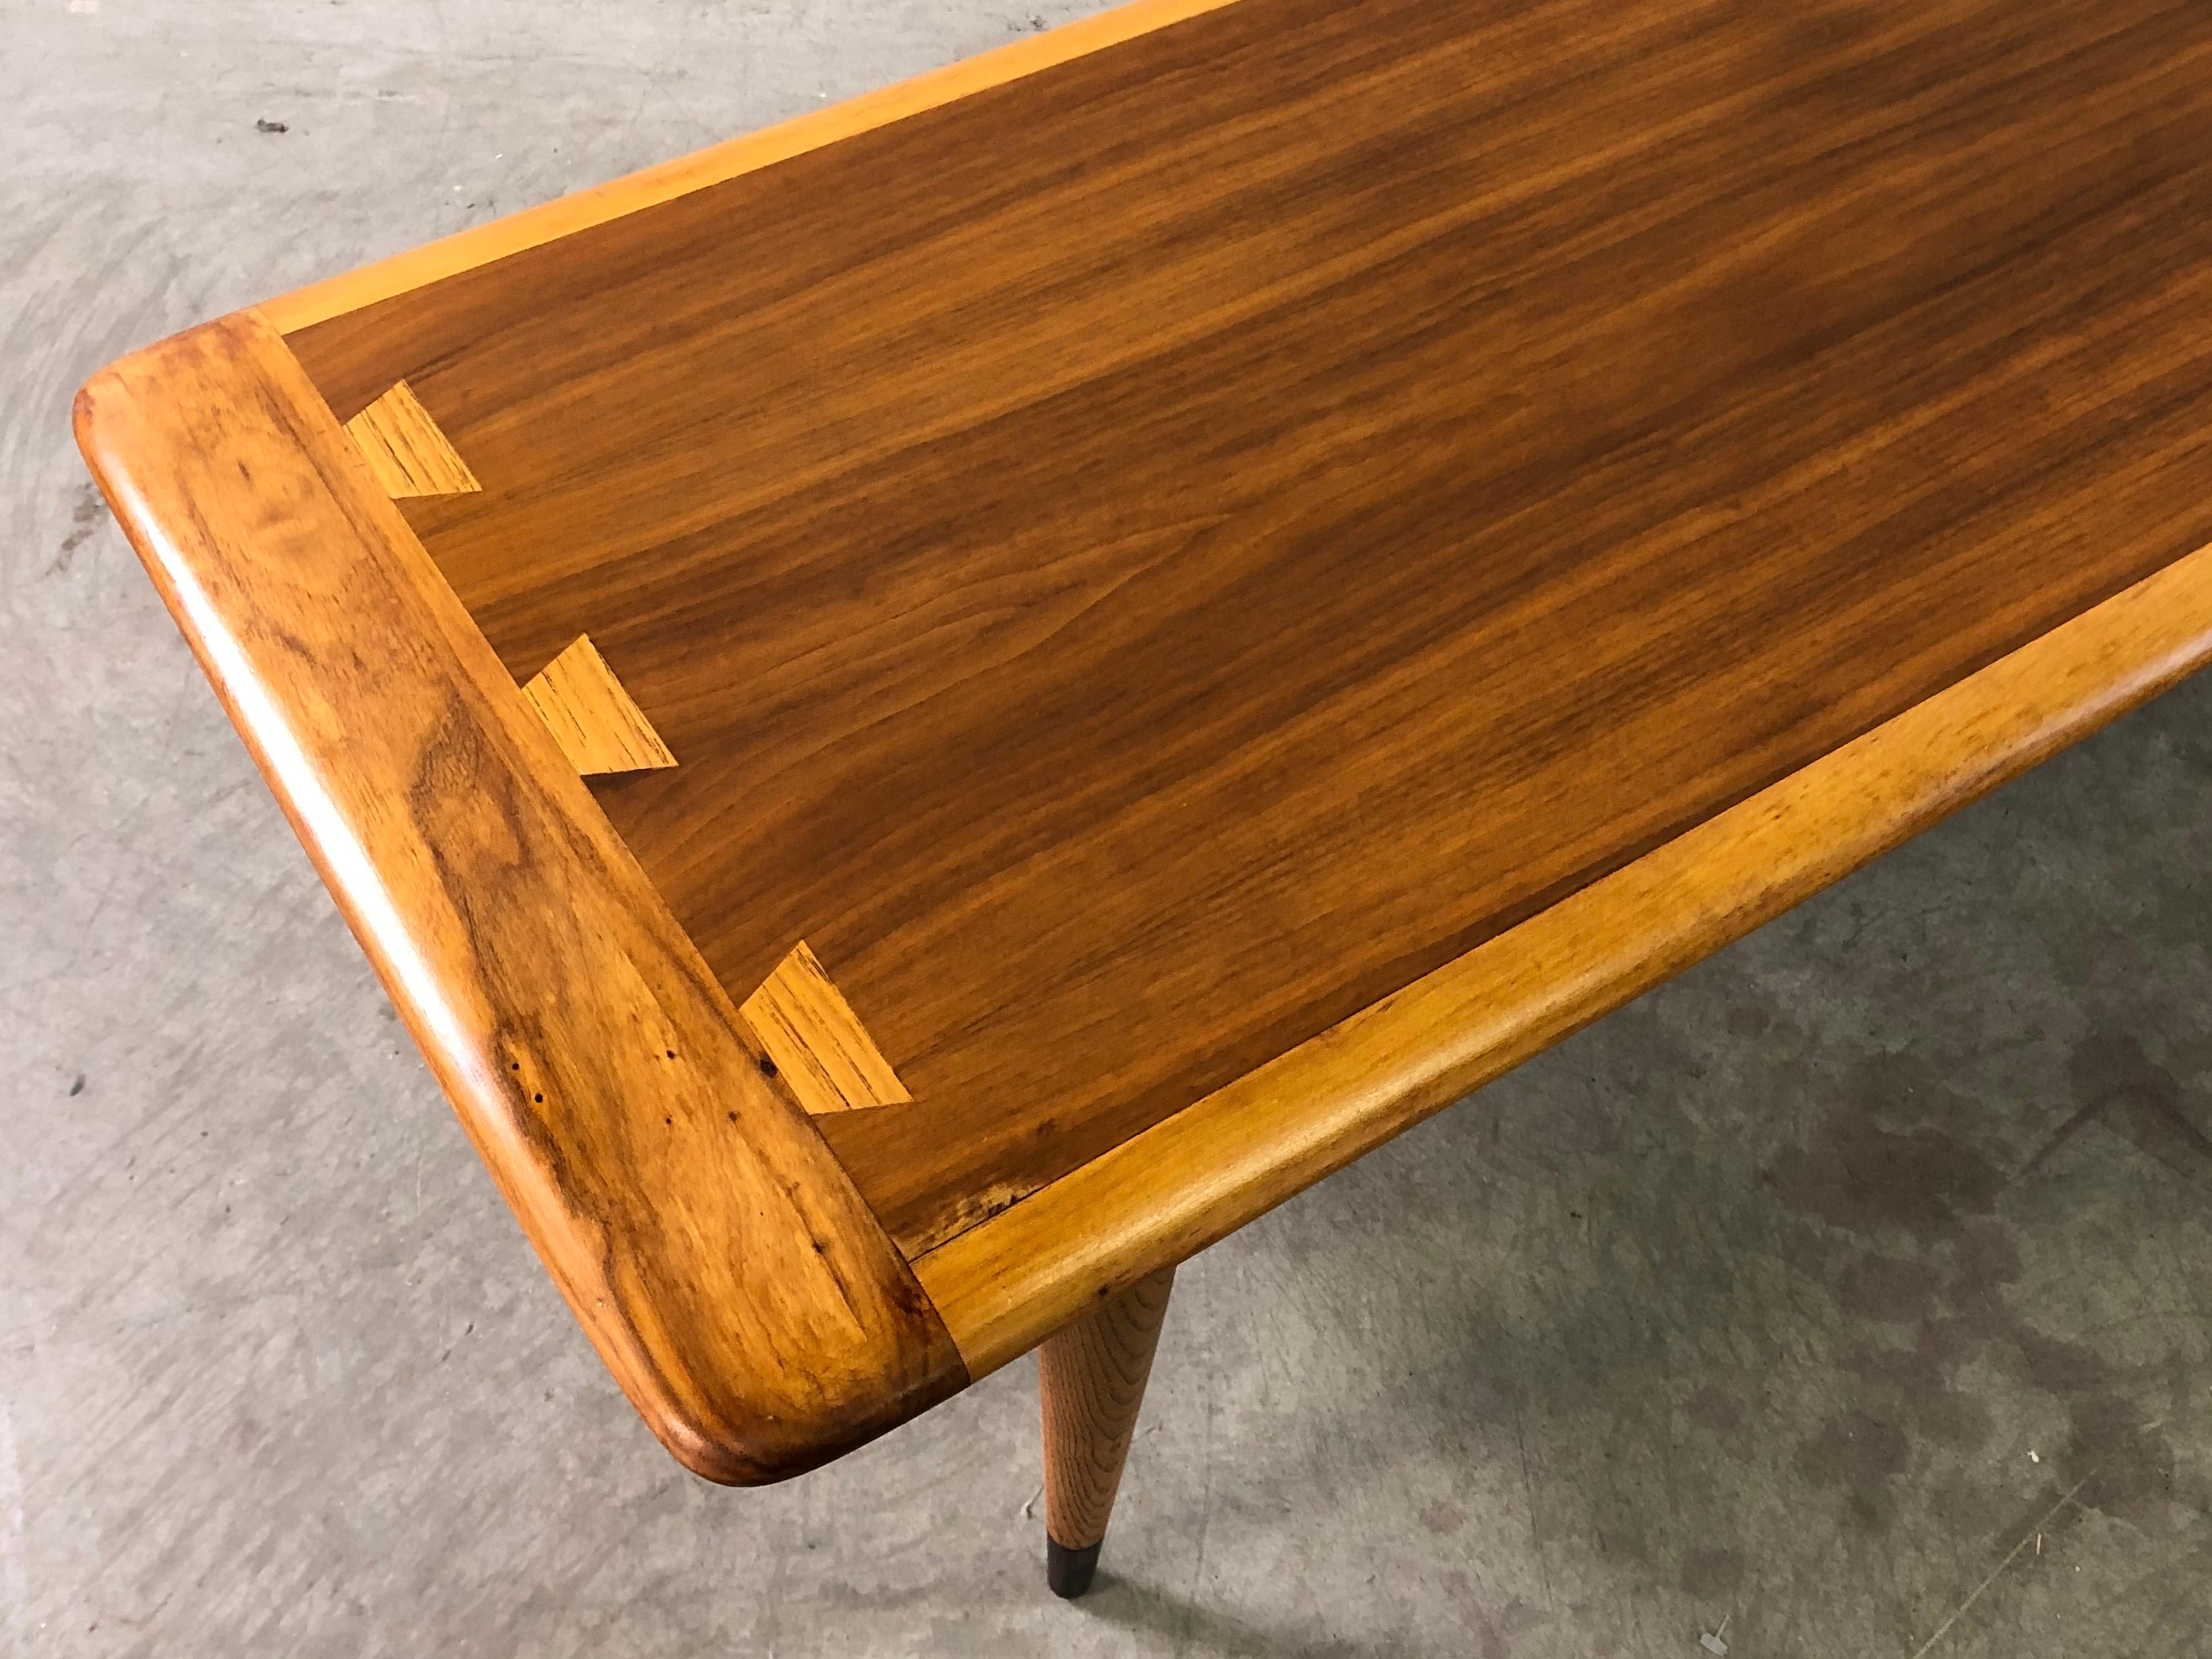 Vintage 1960s walnut and ashwood dovetailed coffee table by Lane Furniture Co. Newly refinished and in excellent condition. Marked underneath.